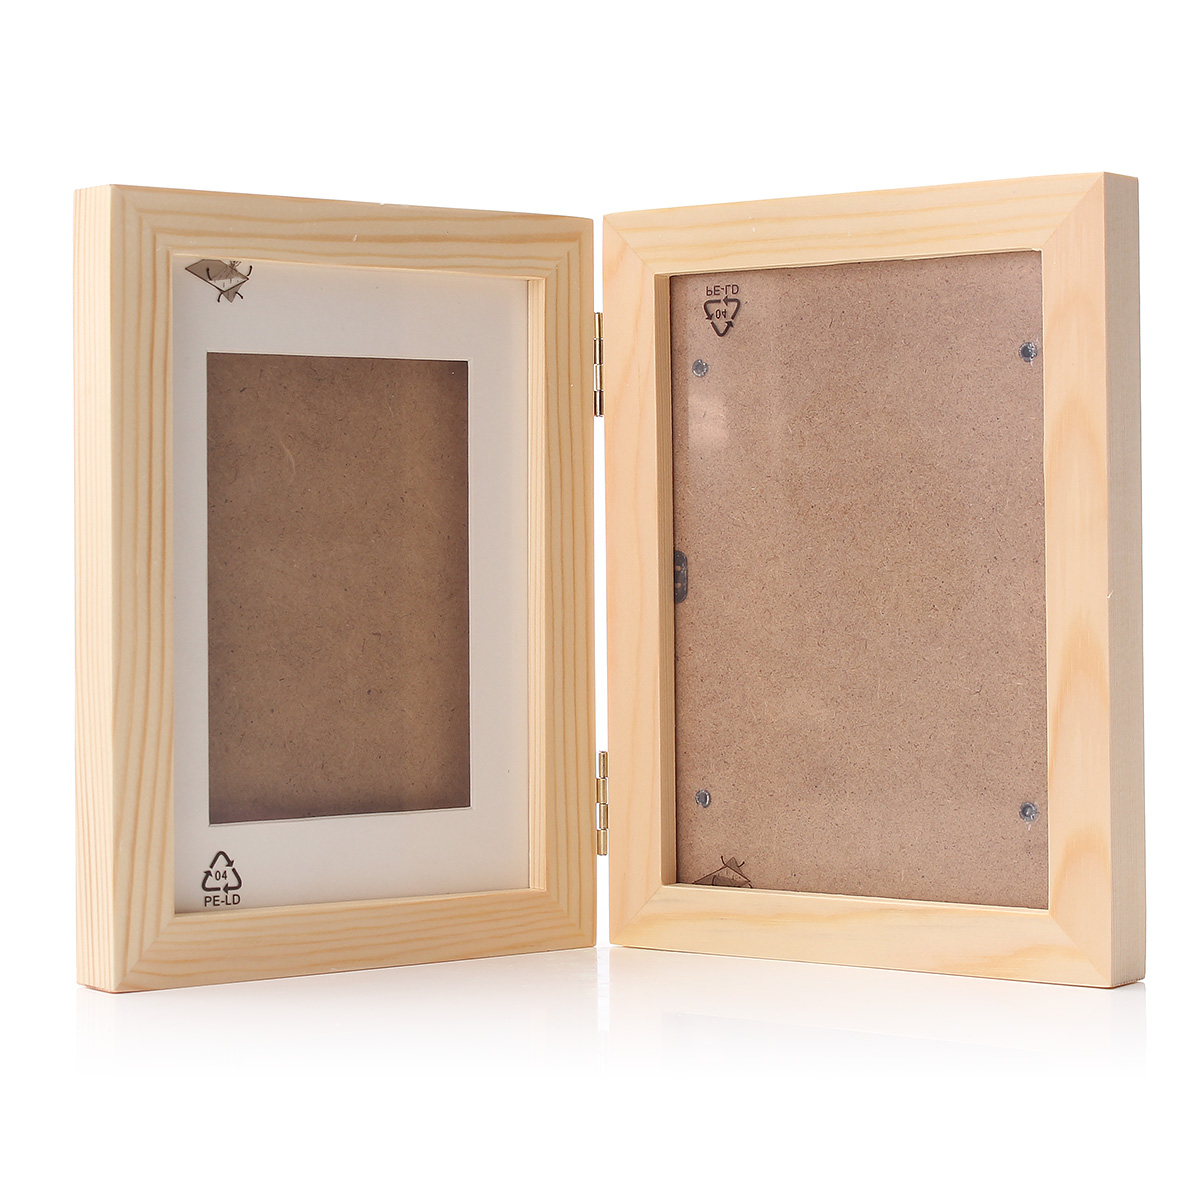 New-Born-Baby-Hand-Foot-Print-Soft-Clay-Photo-Frame-1632981-4